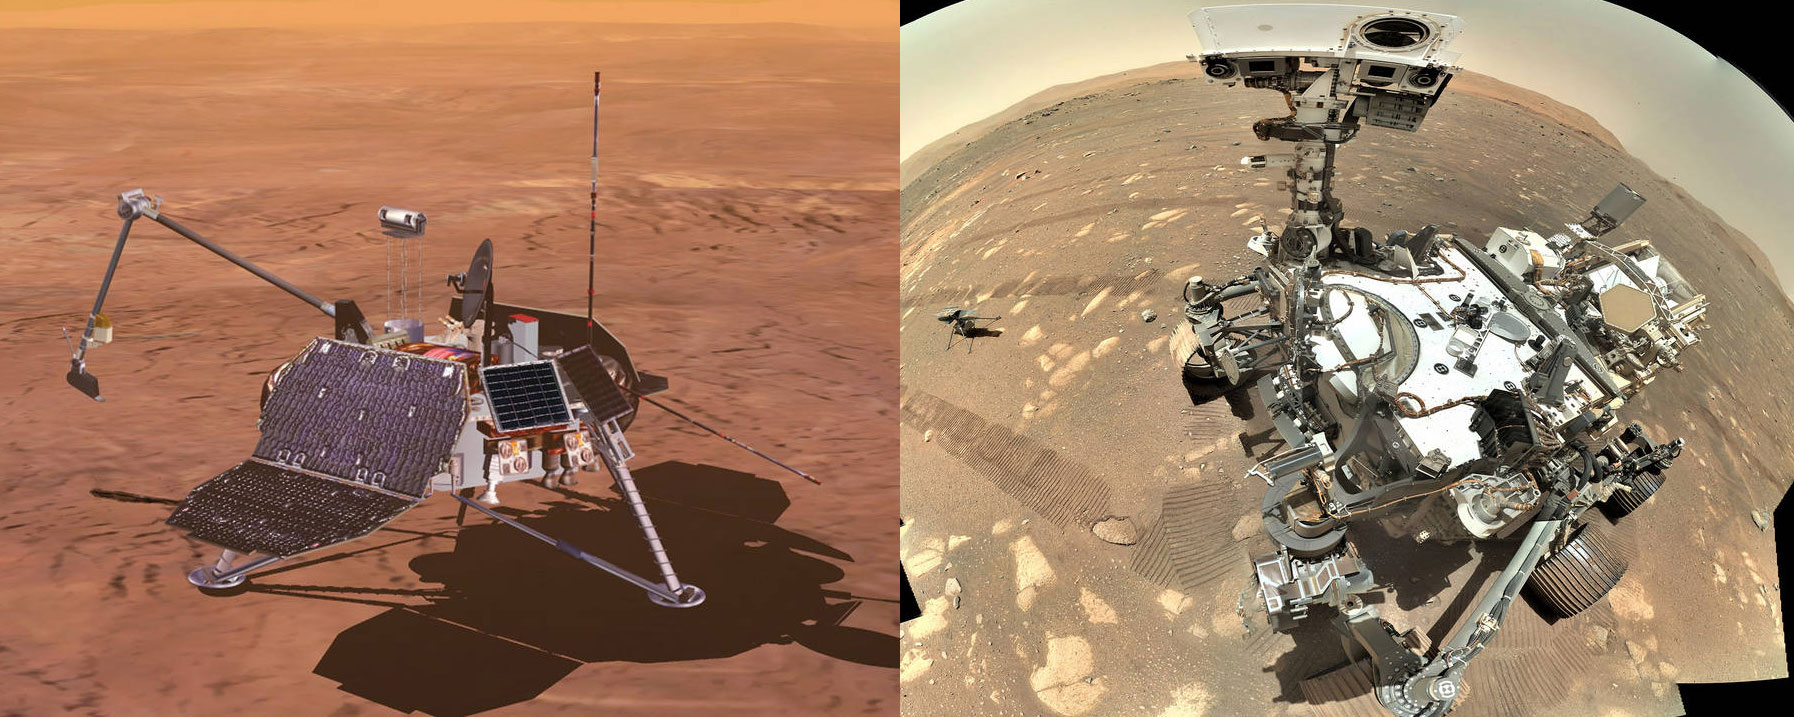 Left: Self-portrait of the Perseverance rover, with the Ingenuity helicopter seen at left shortly after its deployment. Right: During one of its flights, the Ingenuity helicopter imaged Perseverance
